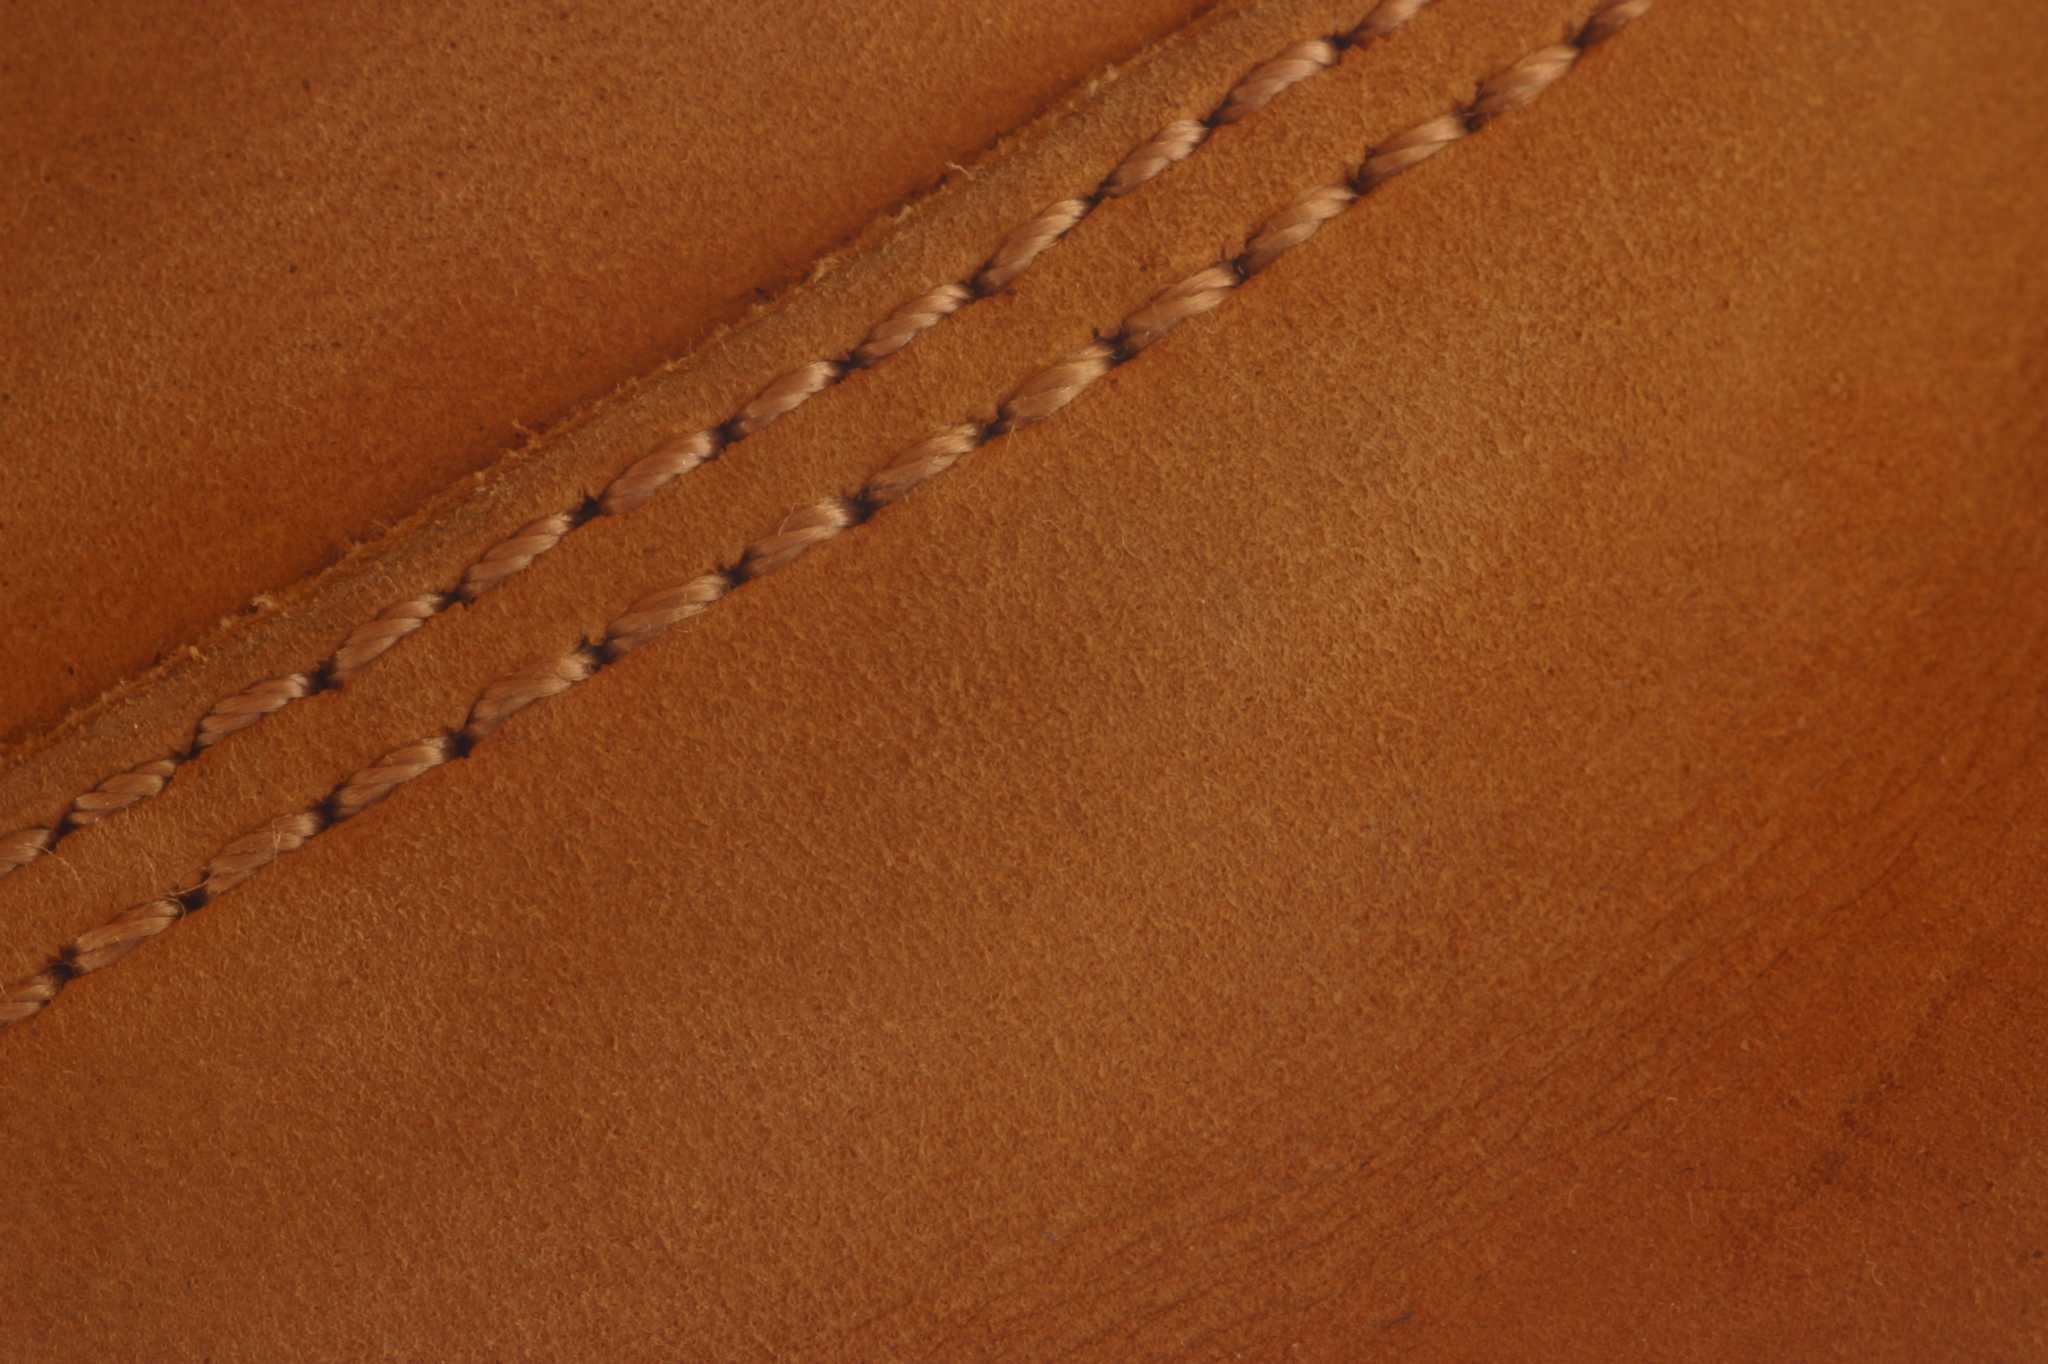 Kathleen repaired her leather with sandpaper and super glue (free